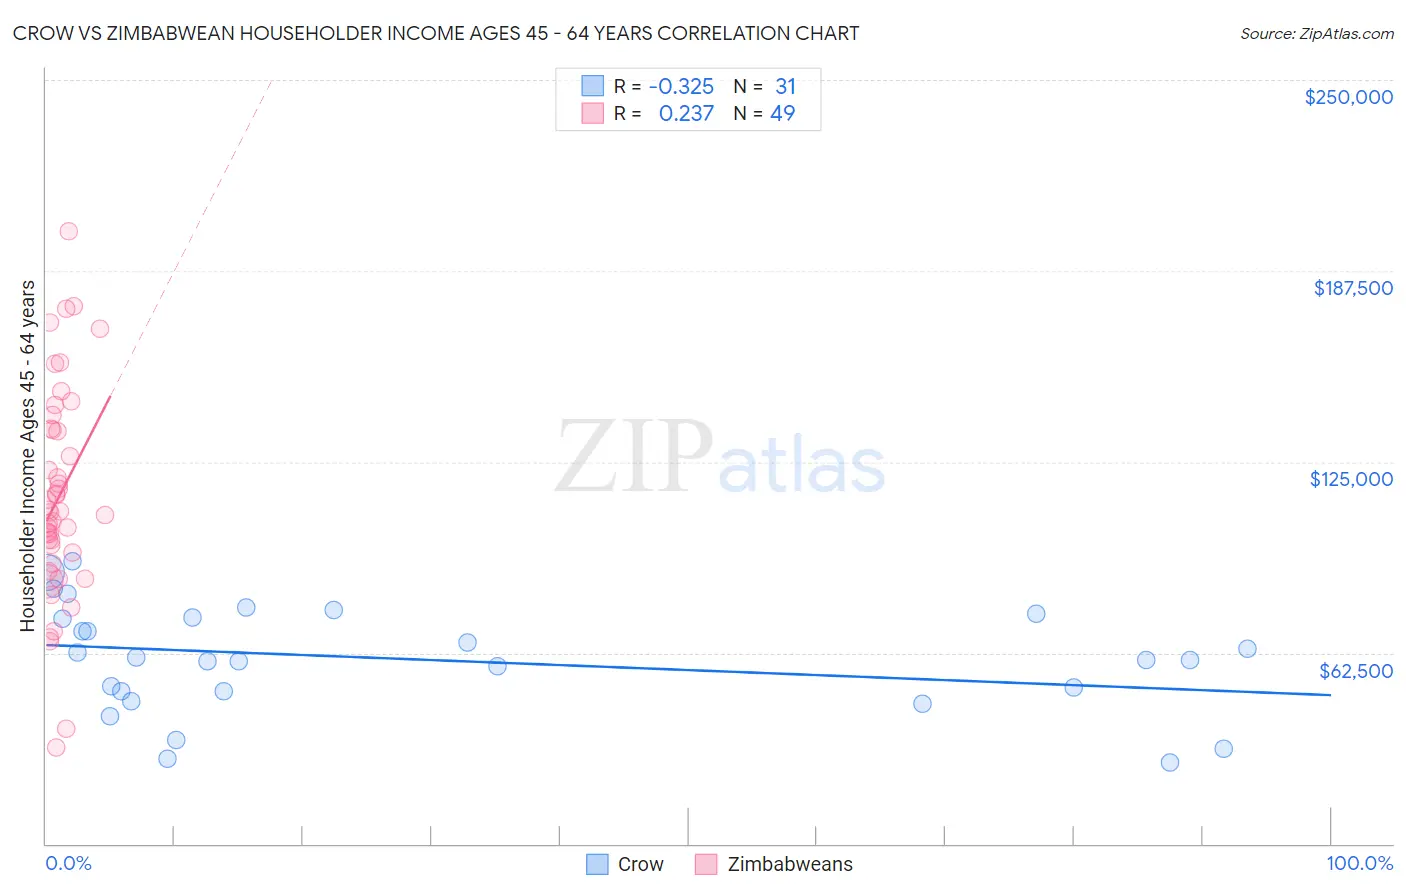 Crow vs Zimbabwean Householder Income Ages 45 - 64 years